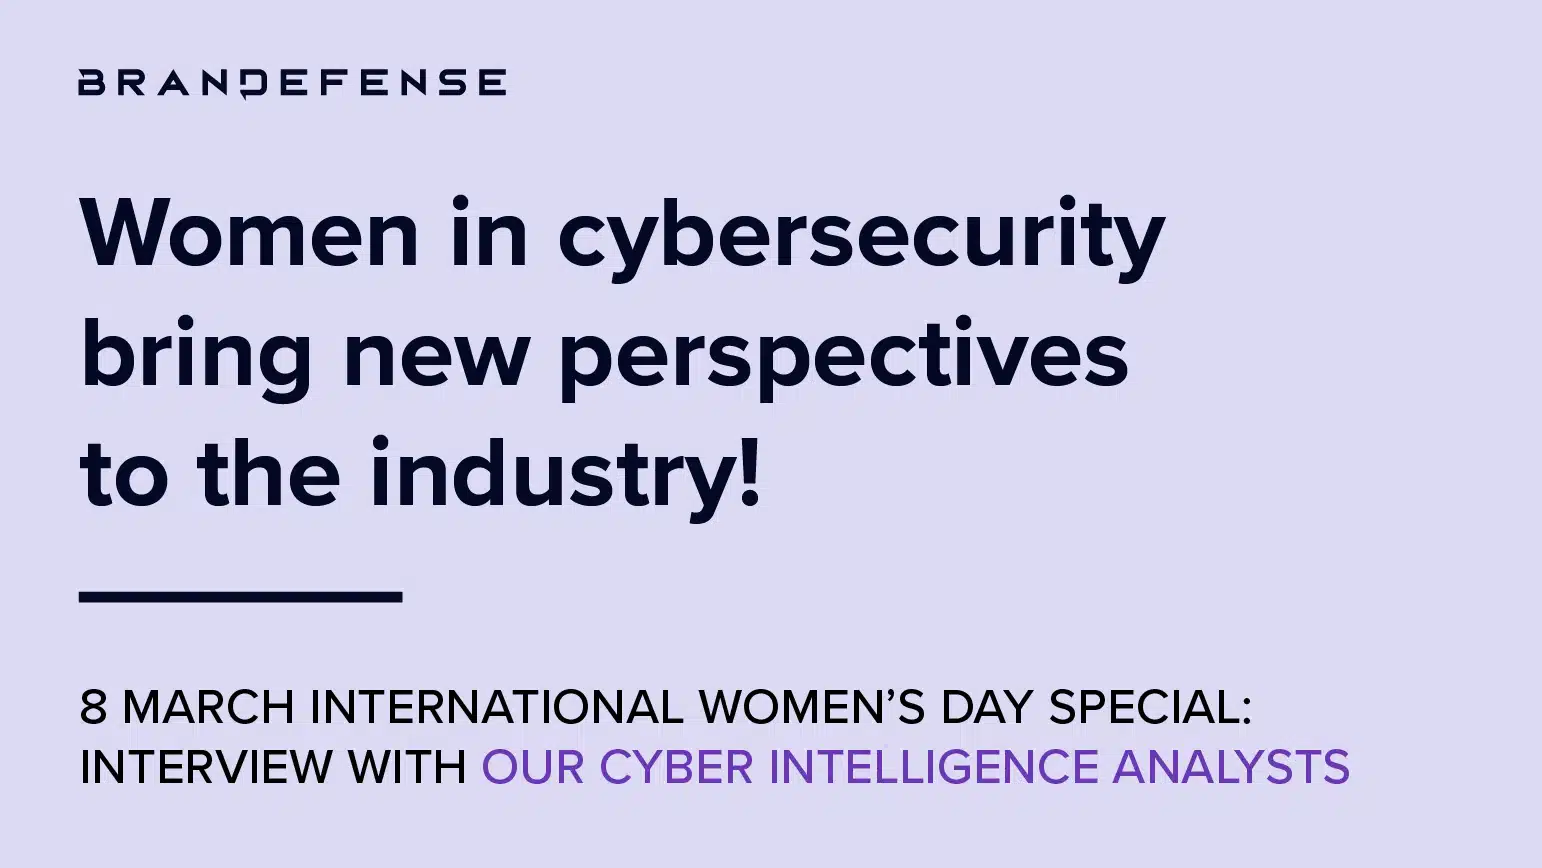 Women in cybersecurity bring new perspectives to the industry!